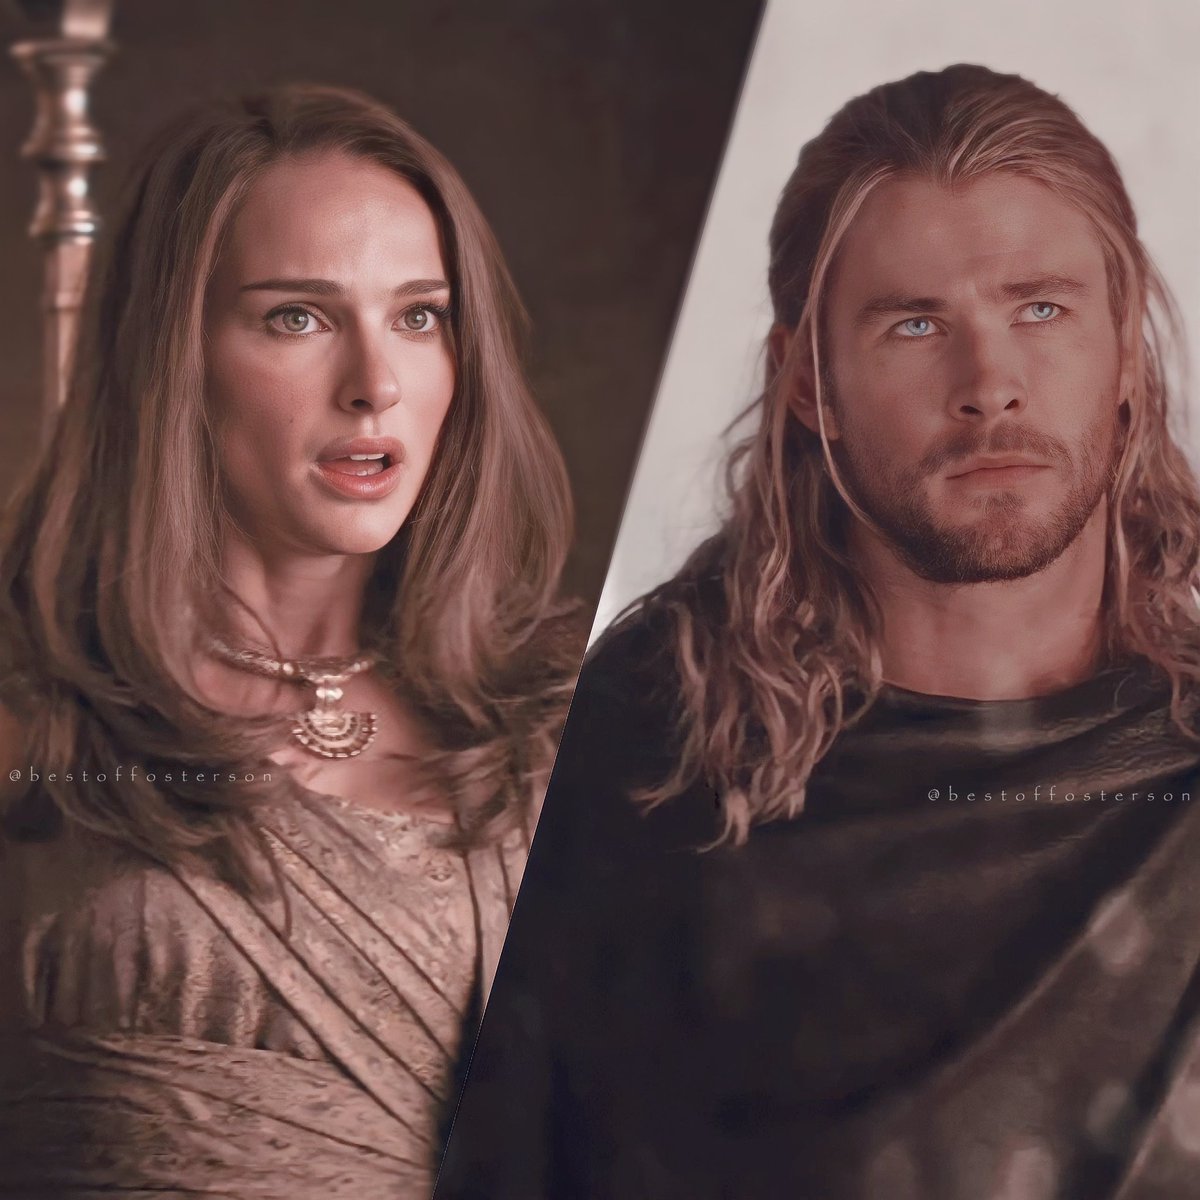 RT @bestoffosterson: You can say whatever you want about Thor: The Dark World, but Jane and Thor. https://t.co/YMav3ZEEbs